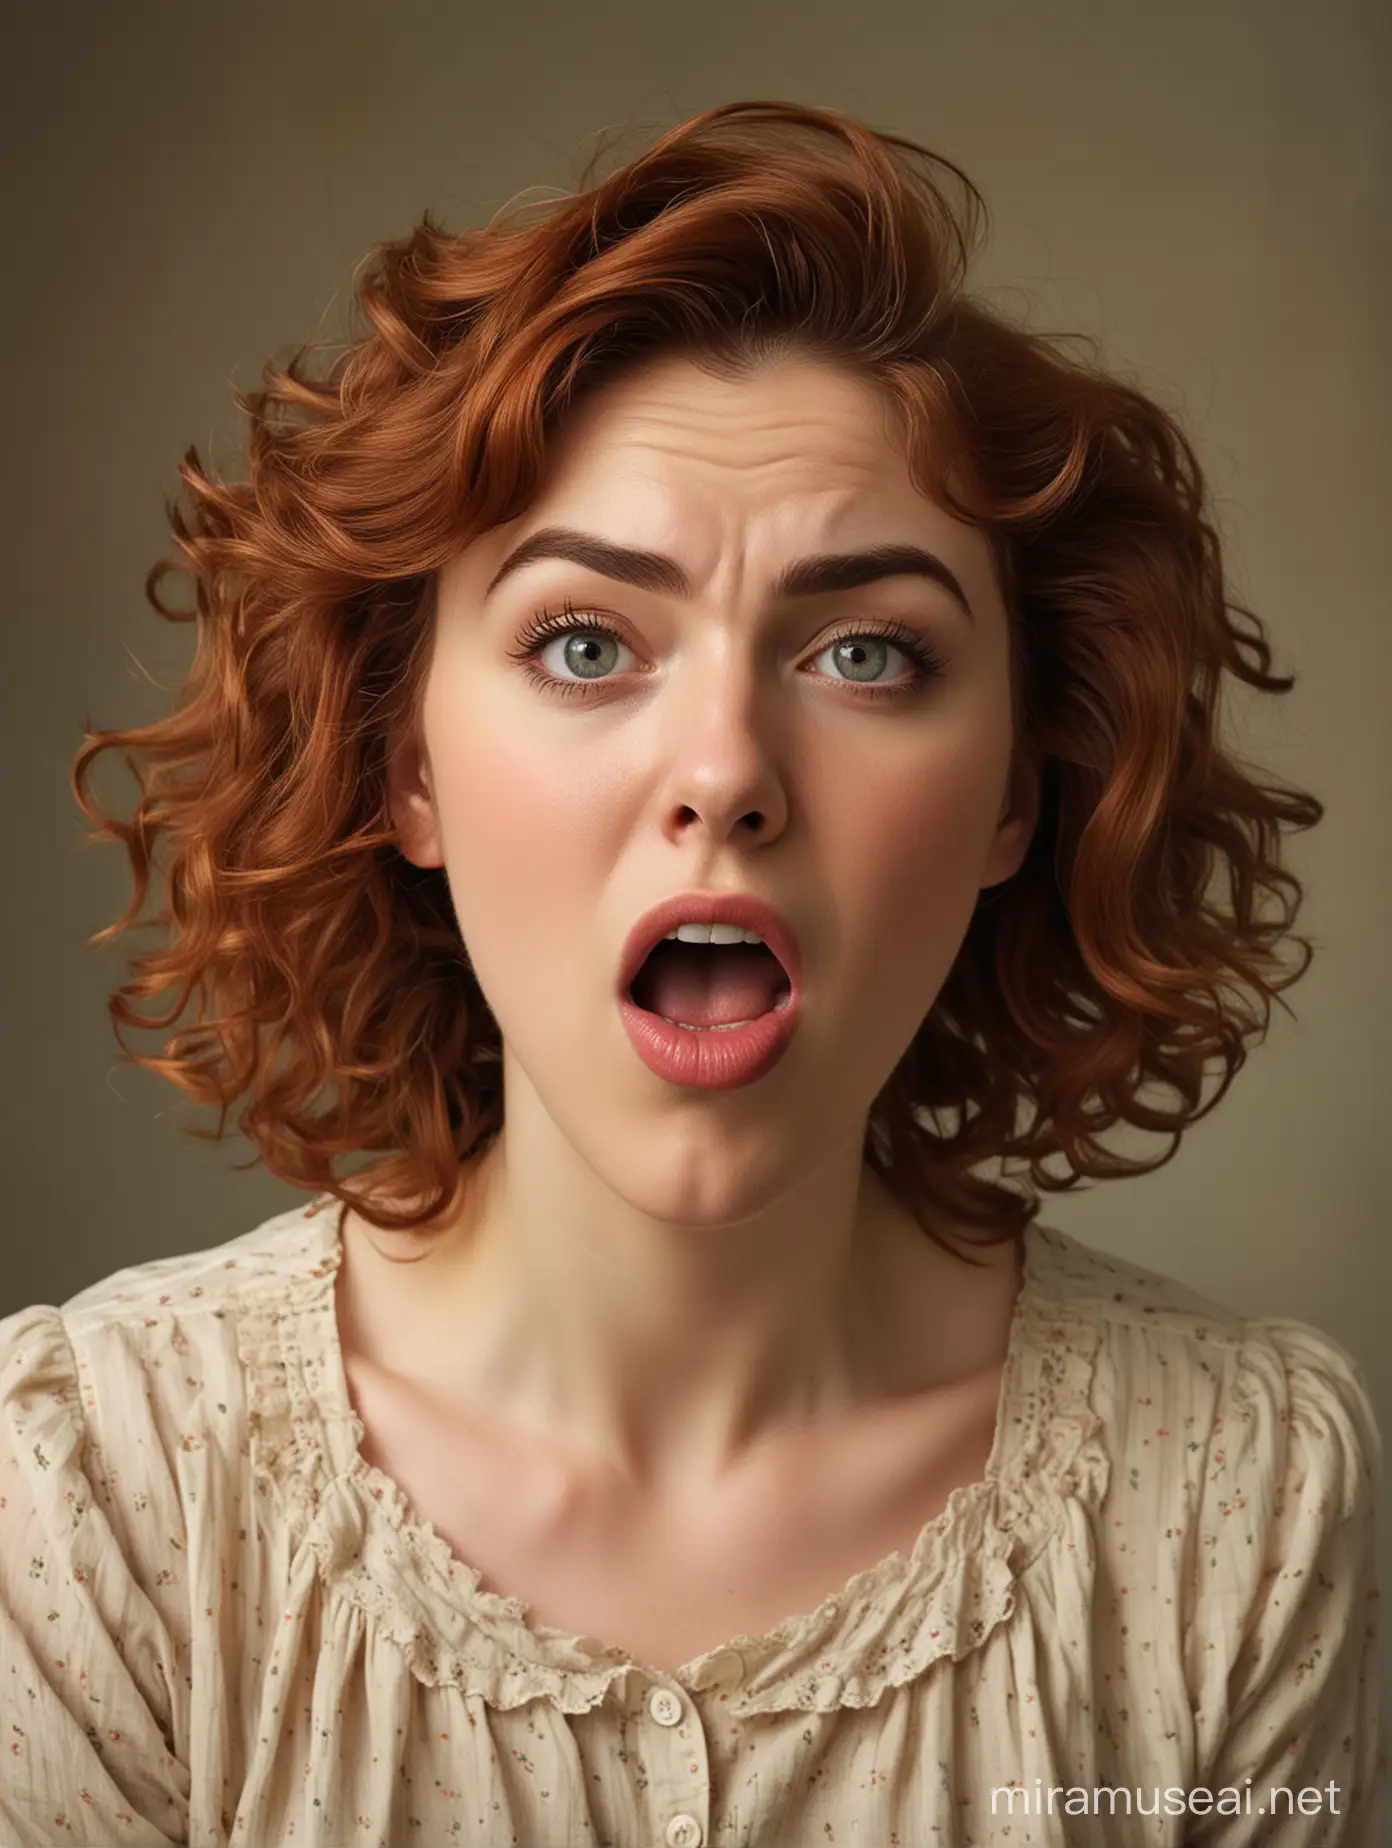 The woman in the image appears to have an expression of surprise or shock, with her eyes wide open and her mouth agape. Her eyebrows are raised, which usually indicates that she's startled or taken aback by something unexpected. Her appearance is somewhat retro, with curly, shoulder-length auburn hair and what seems to be a vintage style to her clothing, suggesting a classic or period aesthetic. The overall impression is that of a dramatic, exaggerated response, the kind that might be used in visual media to convey an immediate and strong emotional reaction.